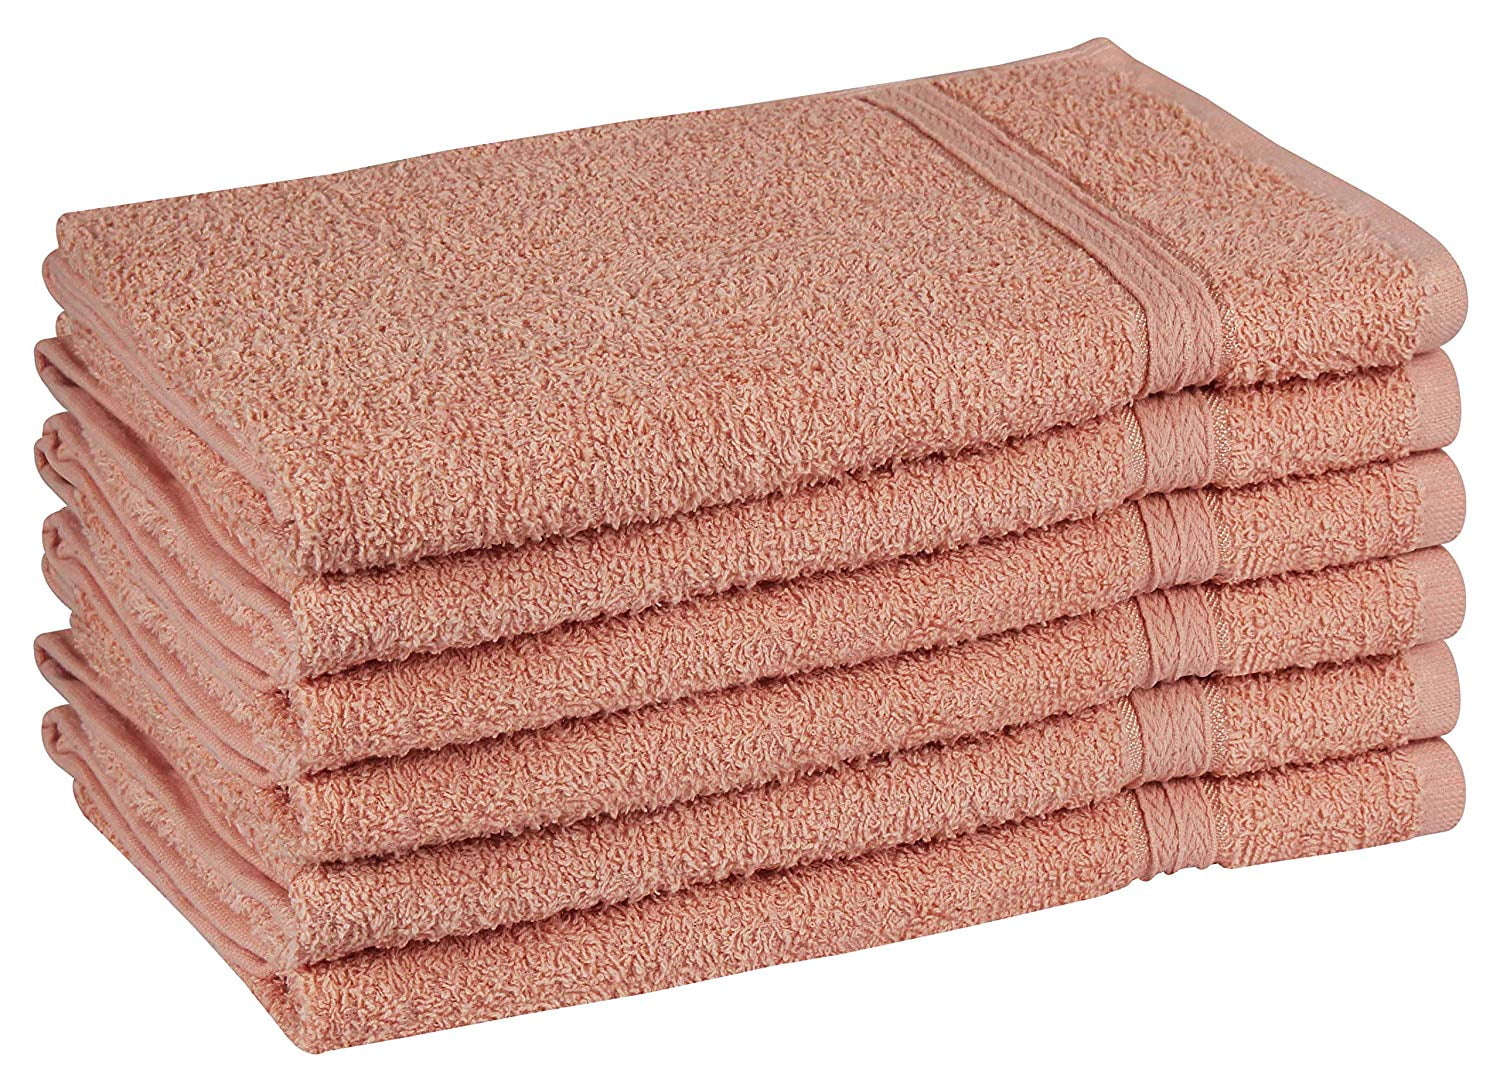 Home Outfitters Pink 100% Cotton 6pcs Bath Towel Set , Absorbent, Bathroom Spa Towel, Modern/Contemporary